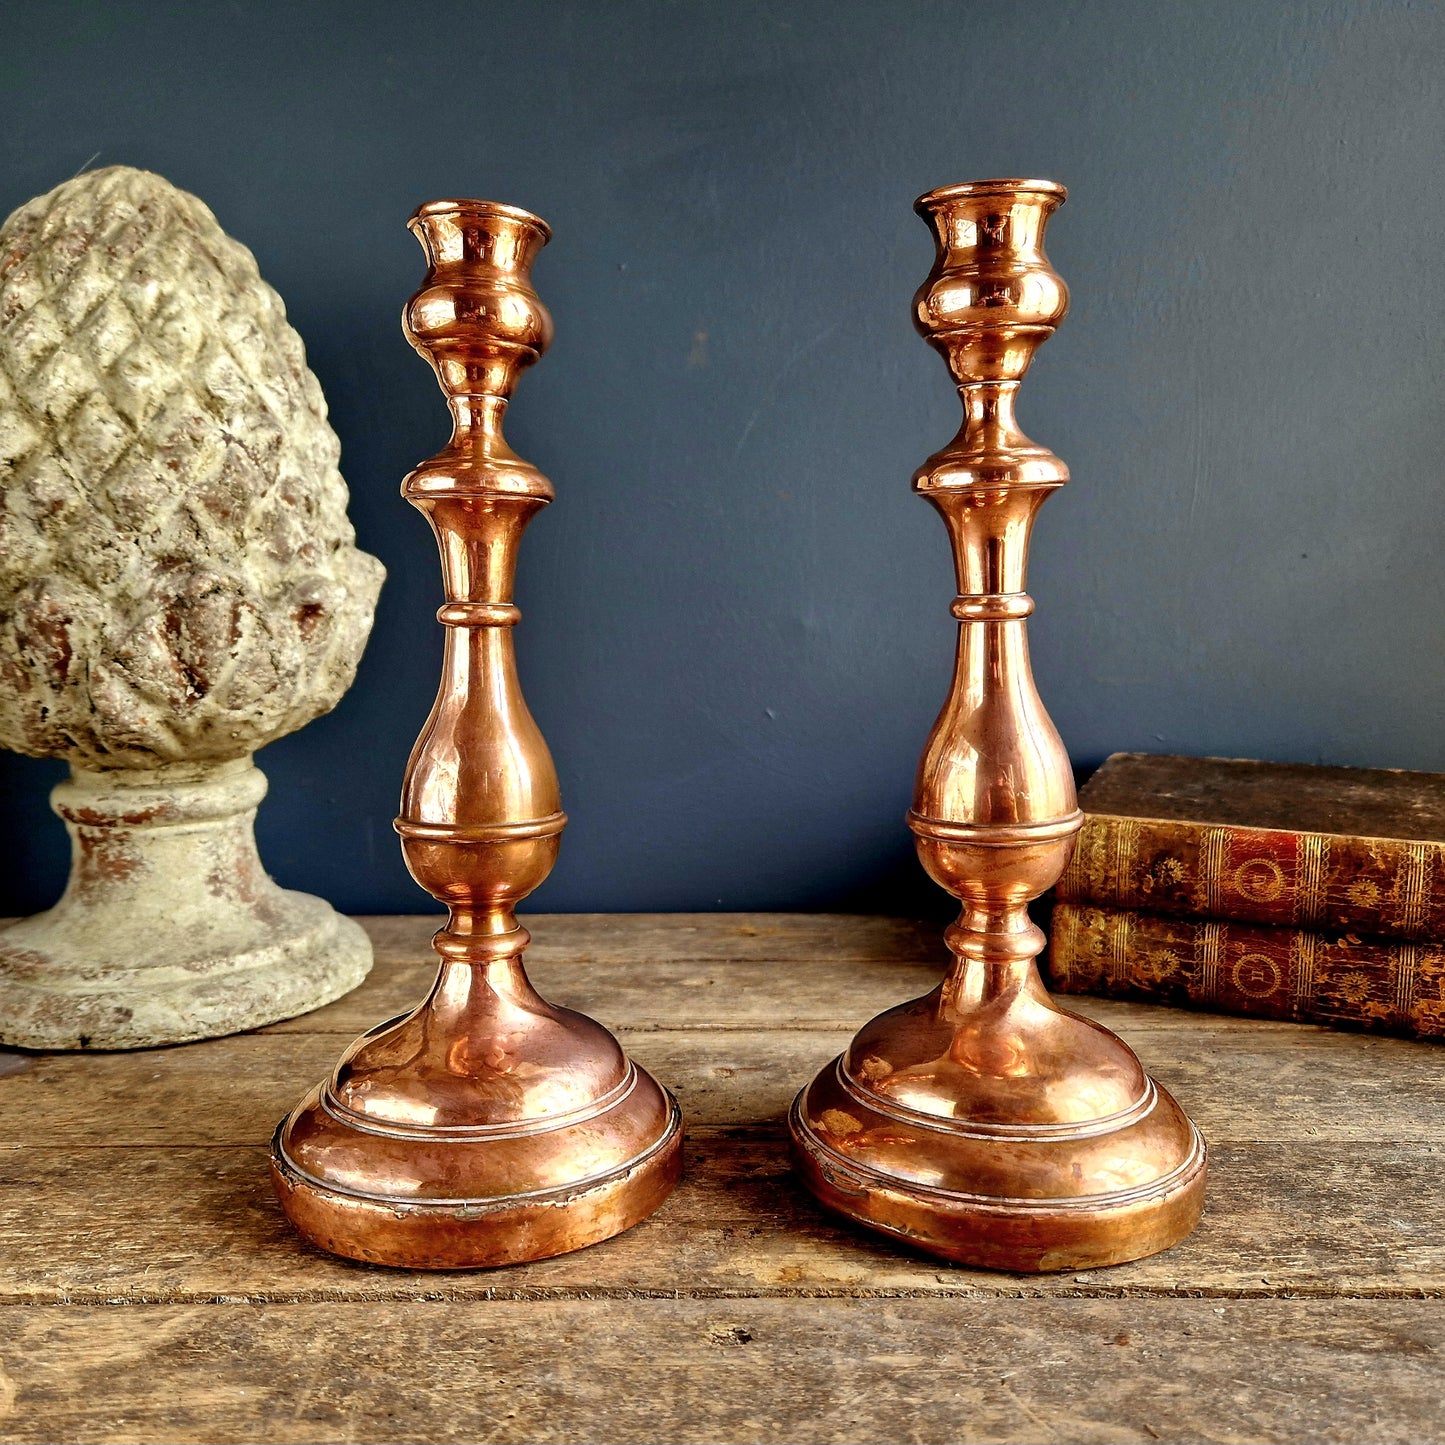 Pair of antique copper candlesticks. French copper candle holders